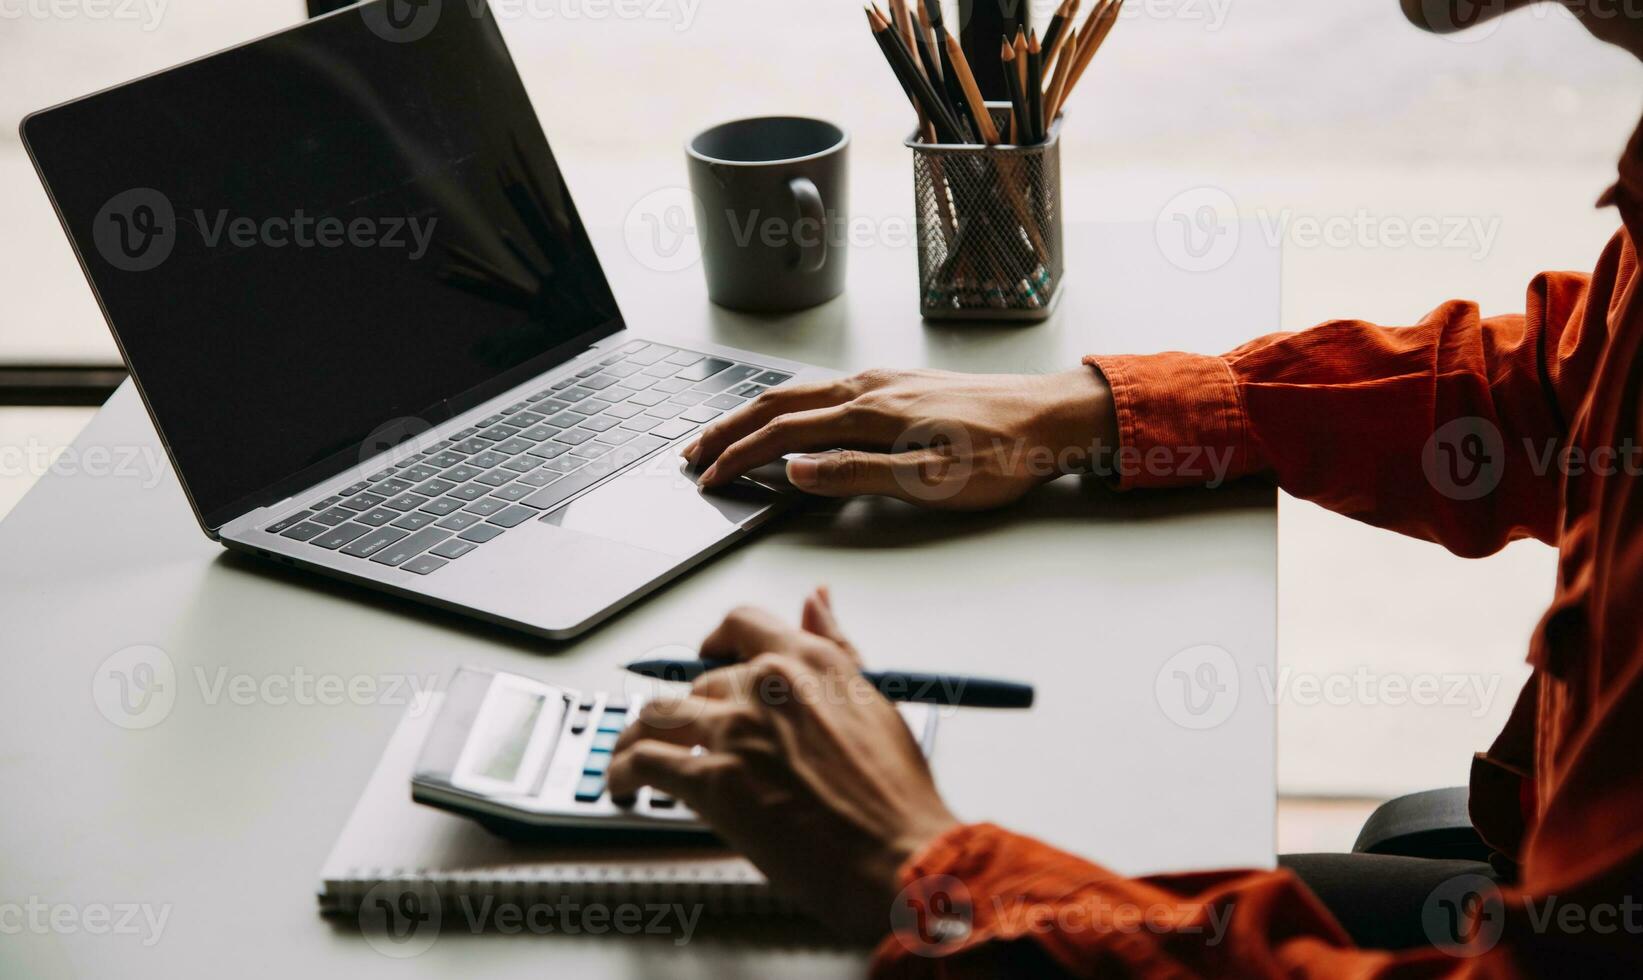 Financial Business team present. Business man hands hold documents with financial statistic stock photo, discussion, and analysis report data the charts and graphs. Finance Financial concept photo